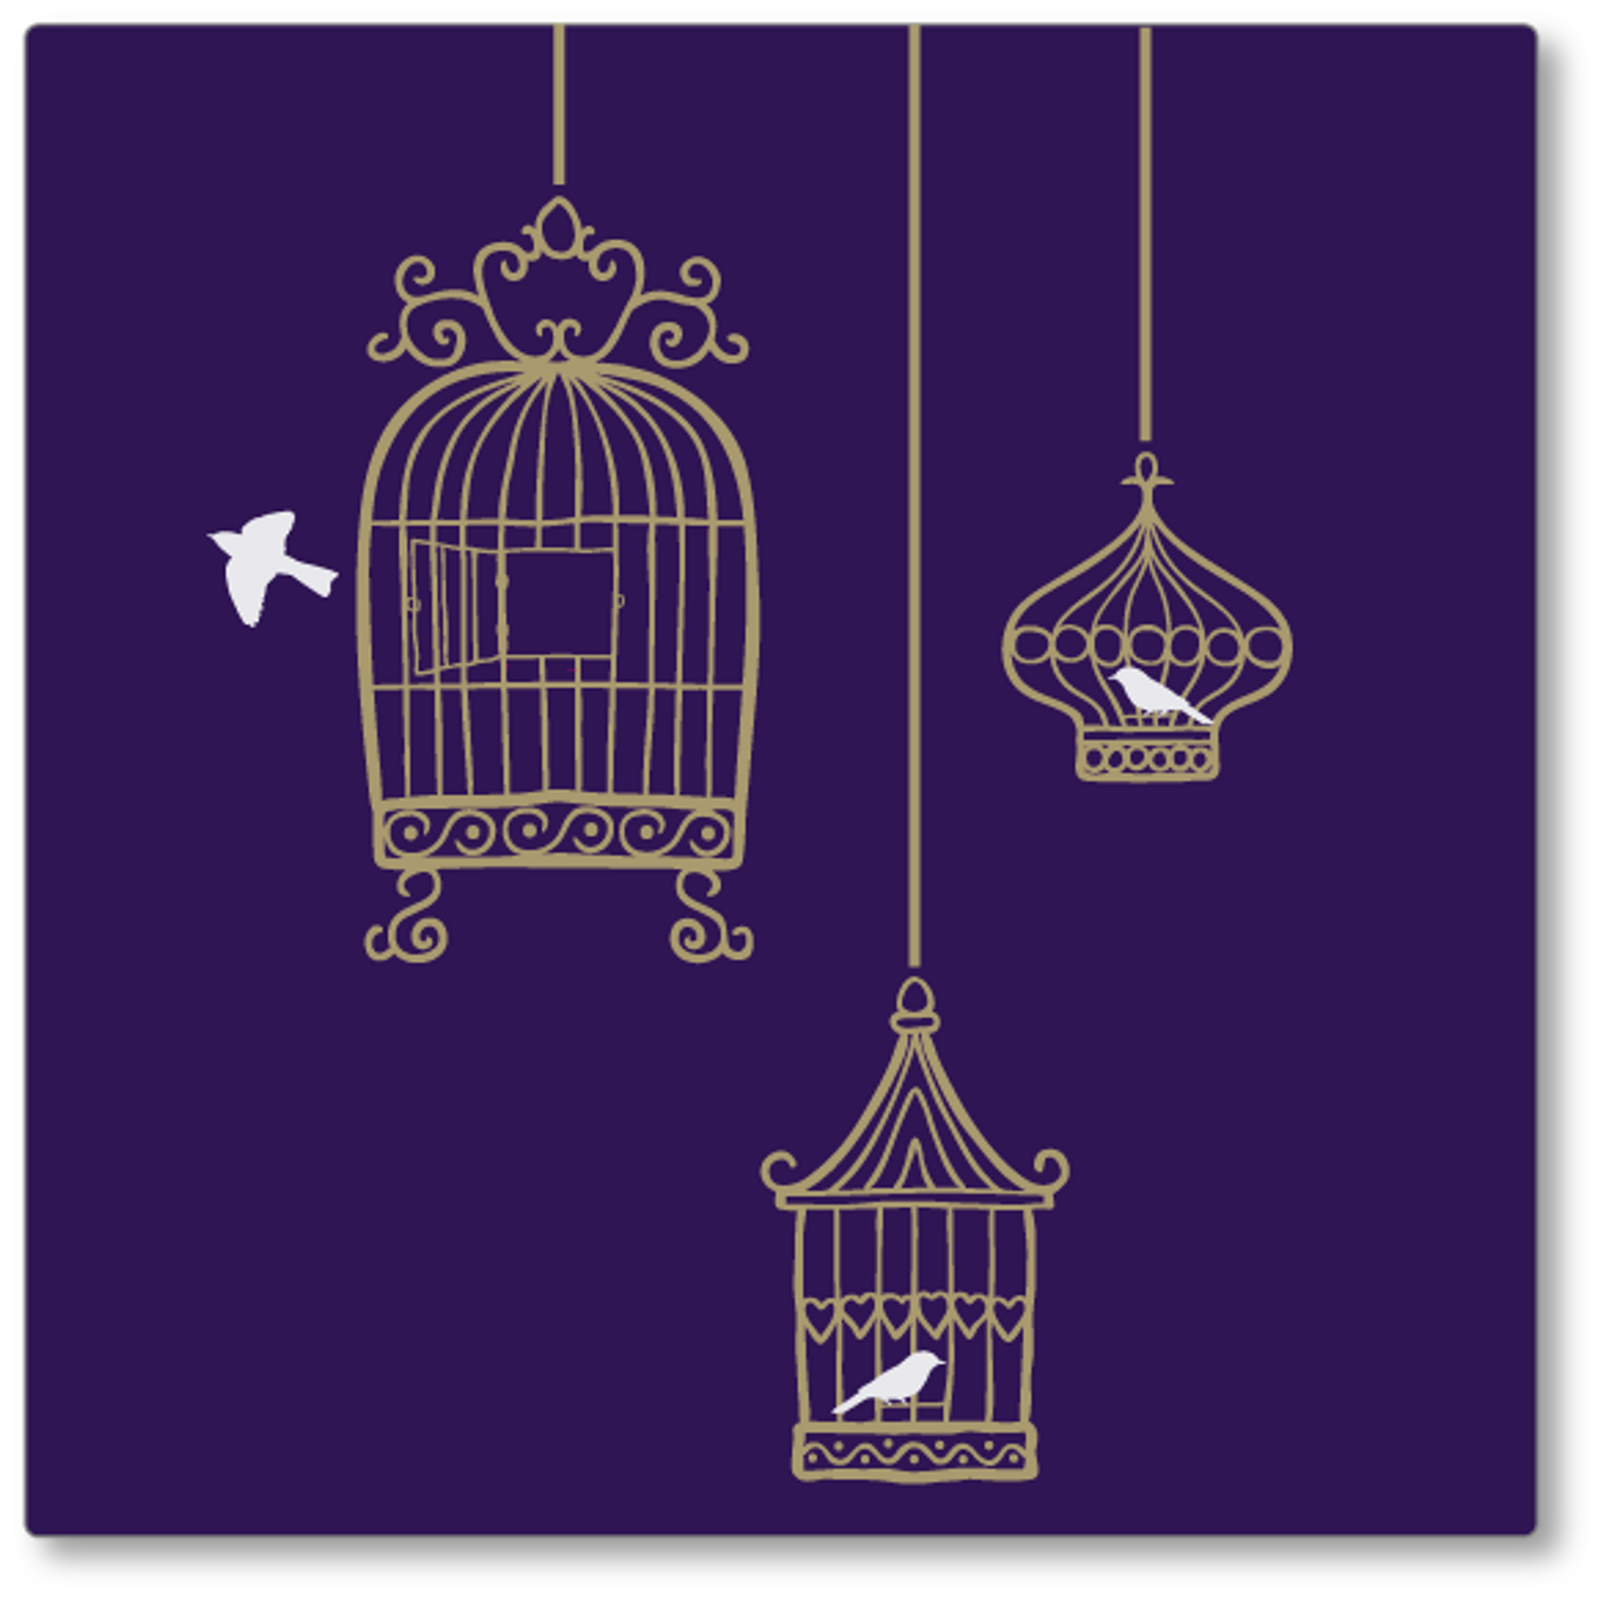 Our quirky set of 3 hanging birdcages was adapted from a hand drawn image. It adds flair to any wall. Shown here gold on purple.